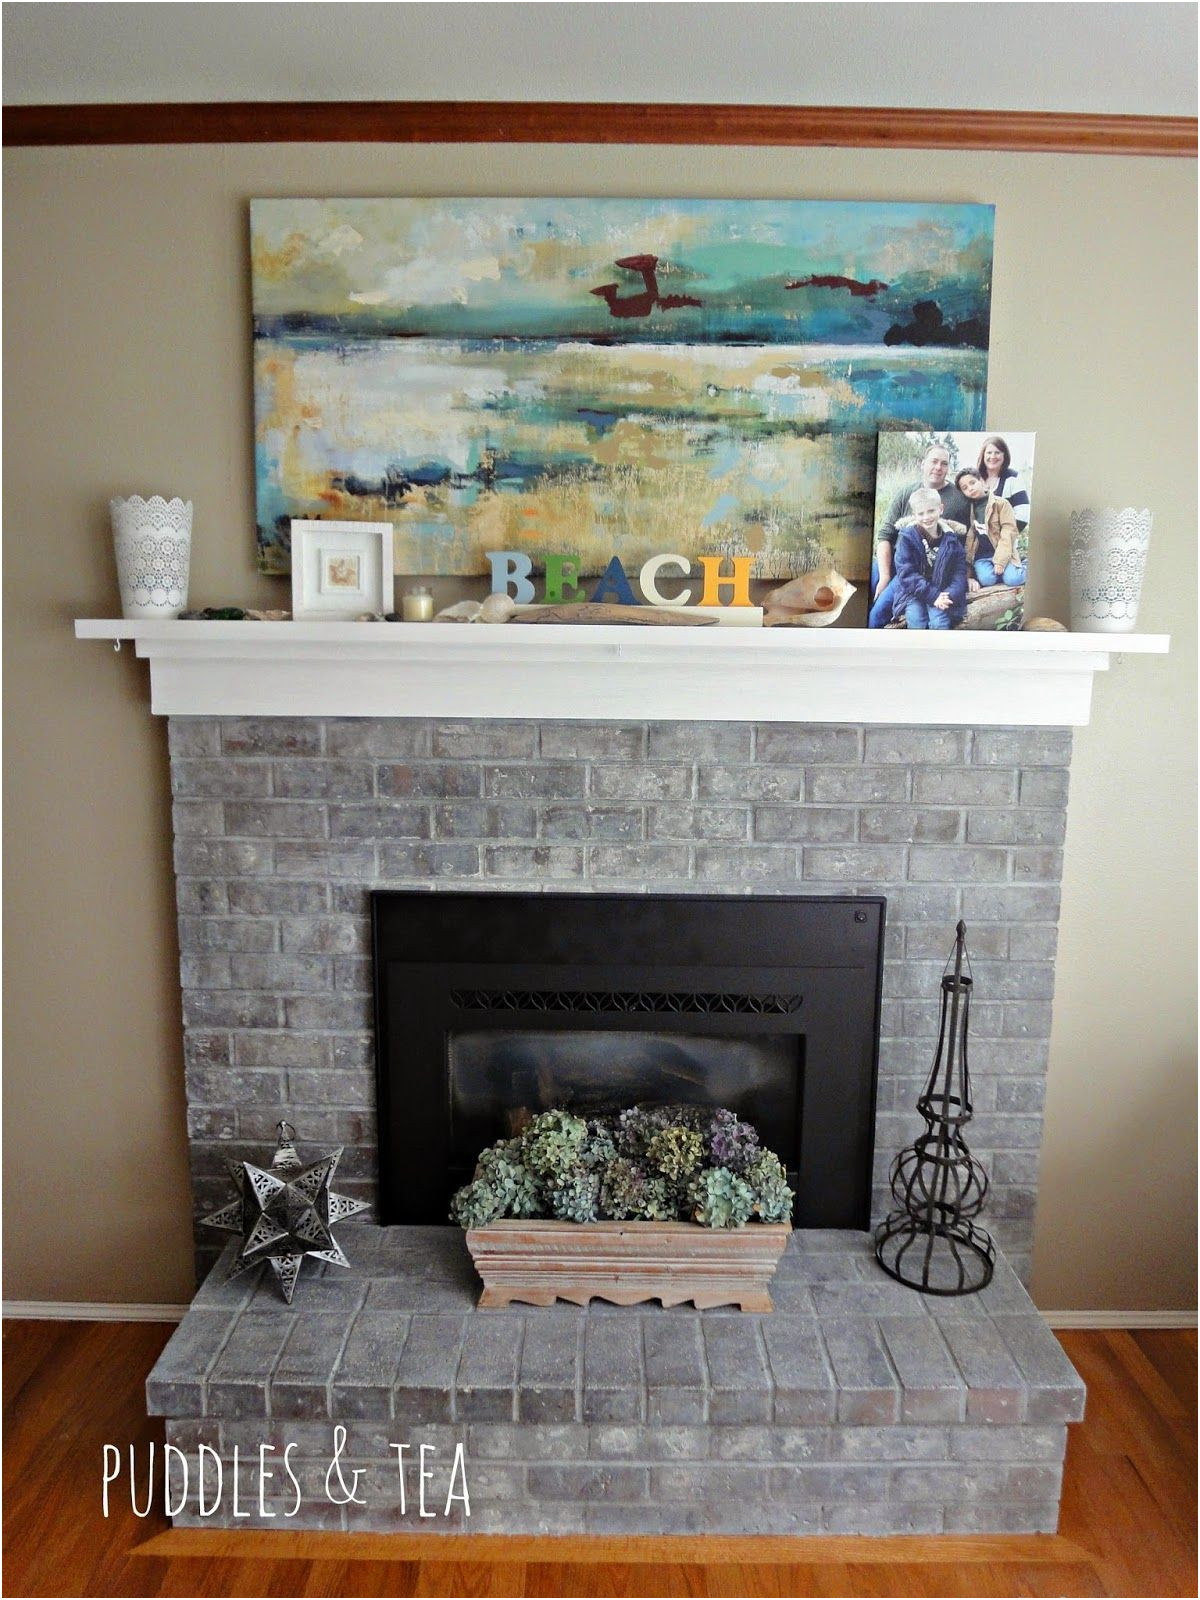 New Remodeling Fireplace Brick